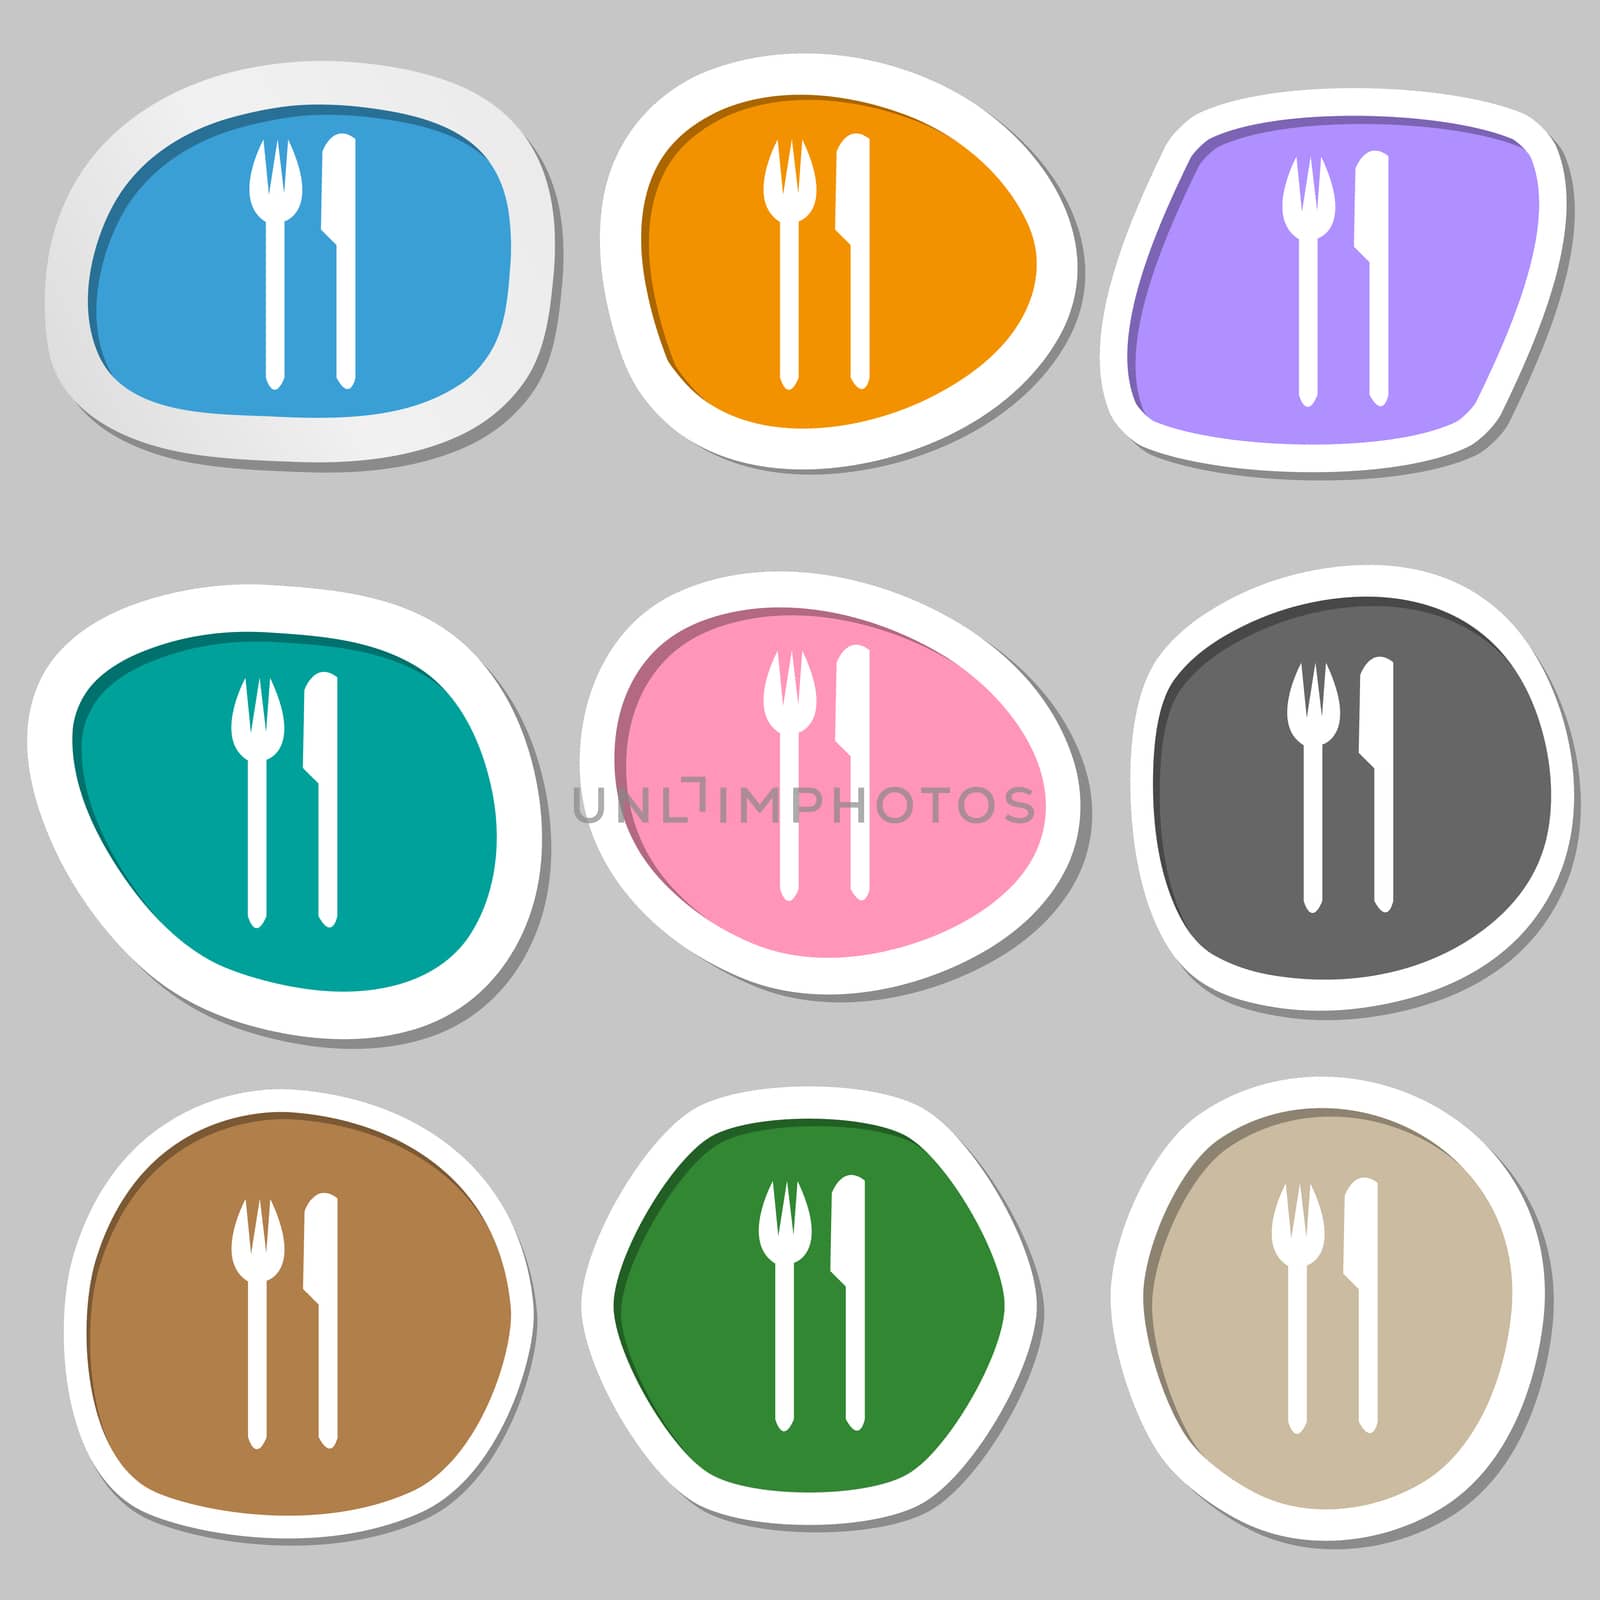 Eat sign icon. Cutlery symbol. Fork and knife. Multicolored paper stickers. illustration